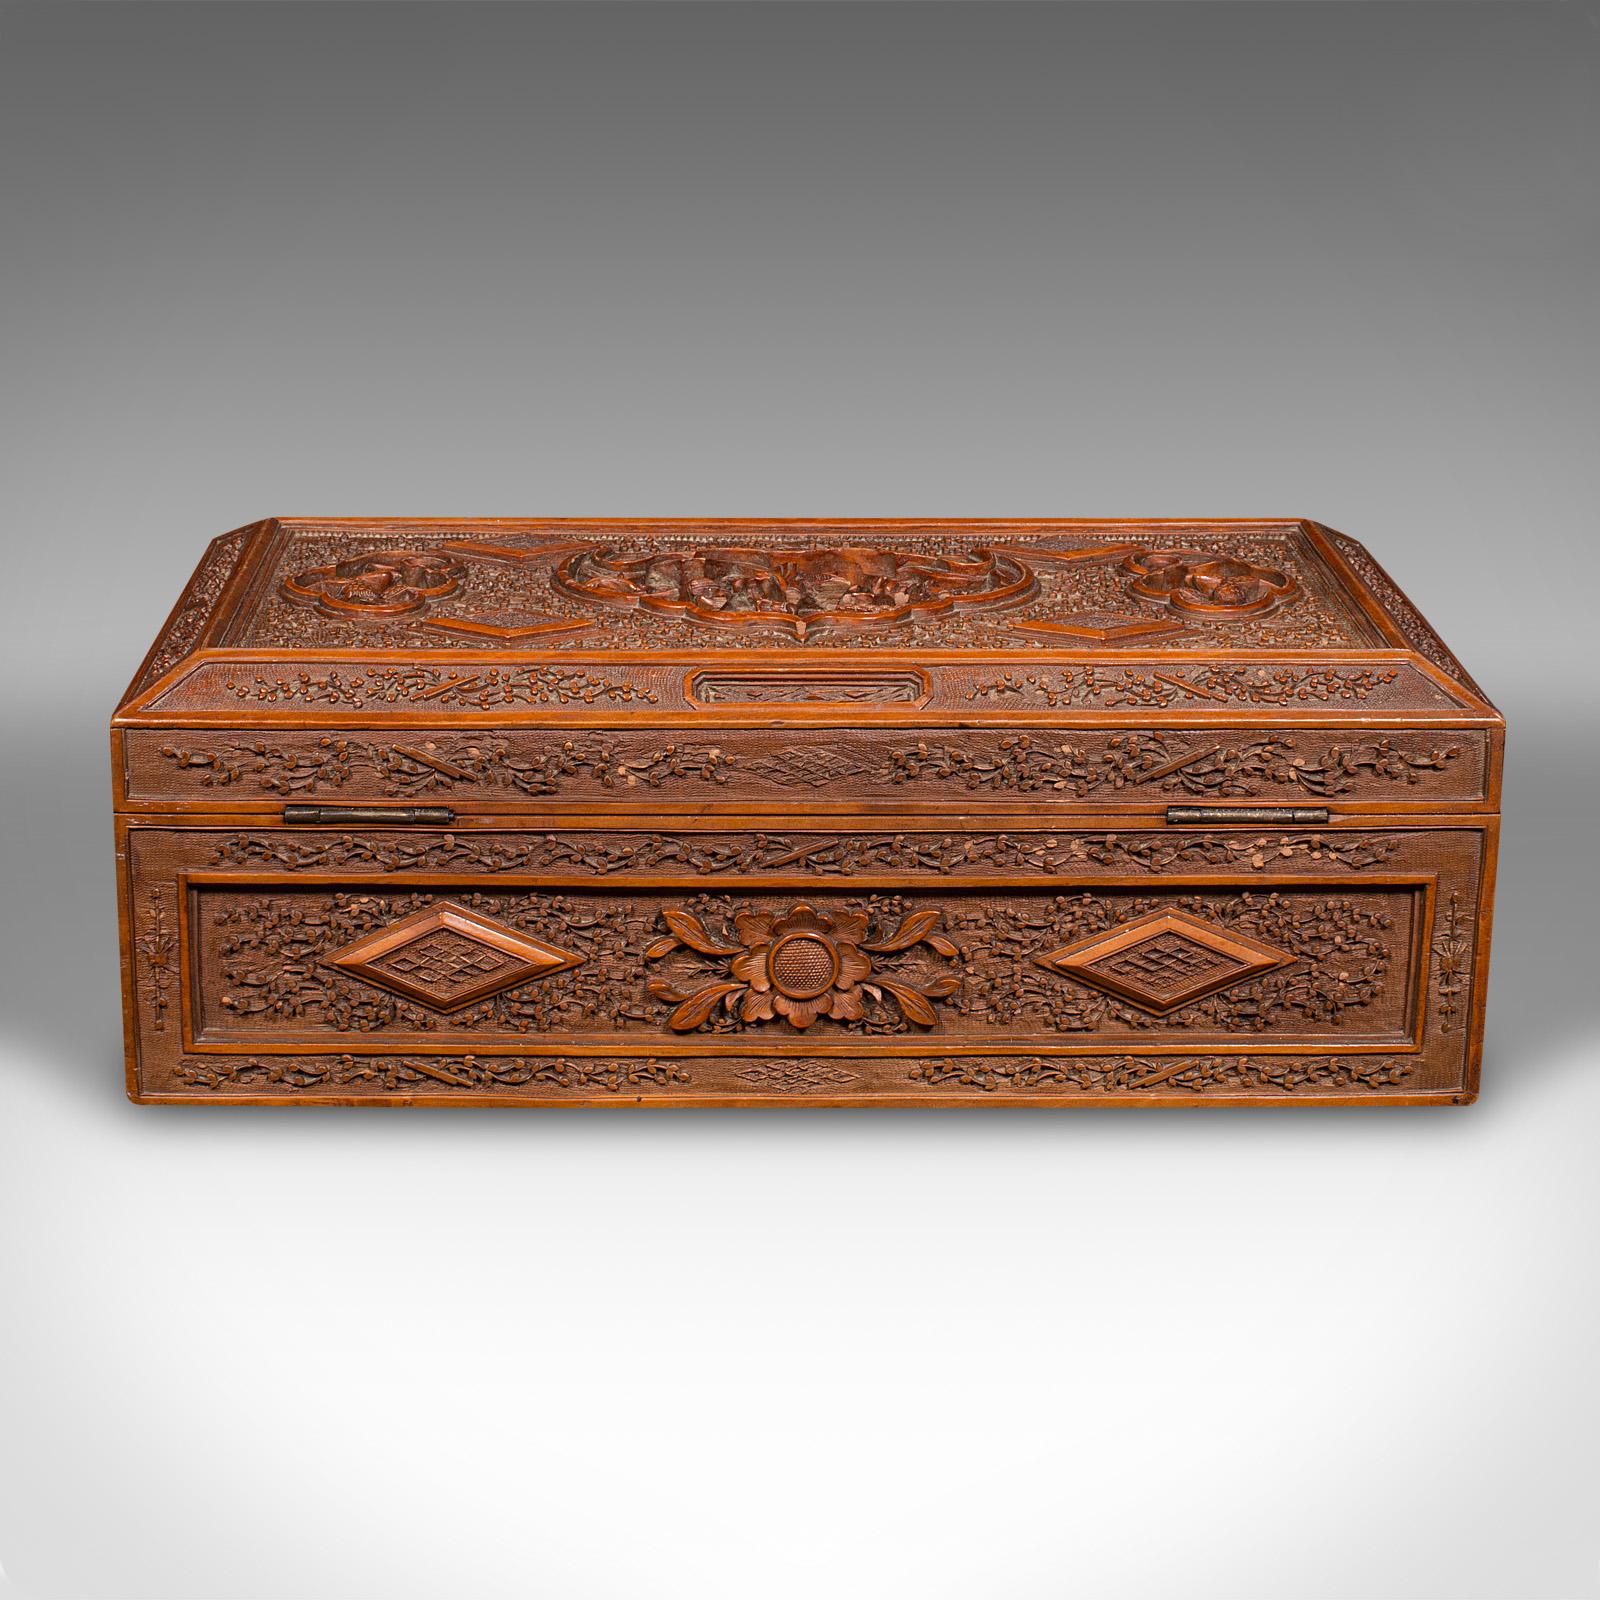 Vintage Carved Keepsake Case, Chinese, Satinwood, Decorative Box, Circa 1950 In Good Condition For Sale In Hele, Devon, GB